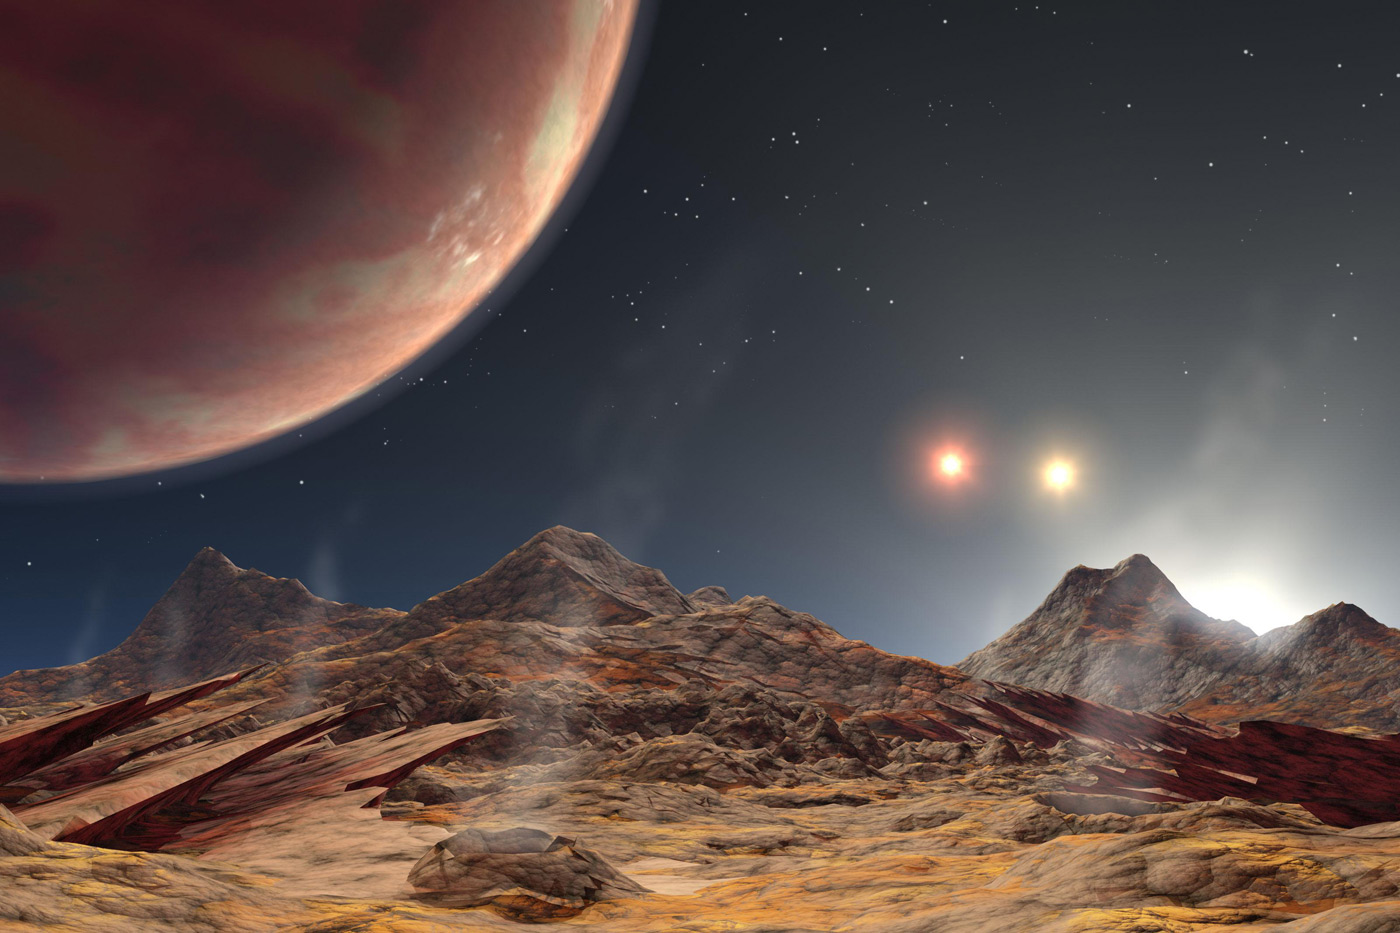 Scientists find rare 3-star system with a hot Jupiter-like planet